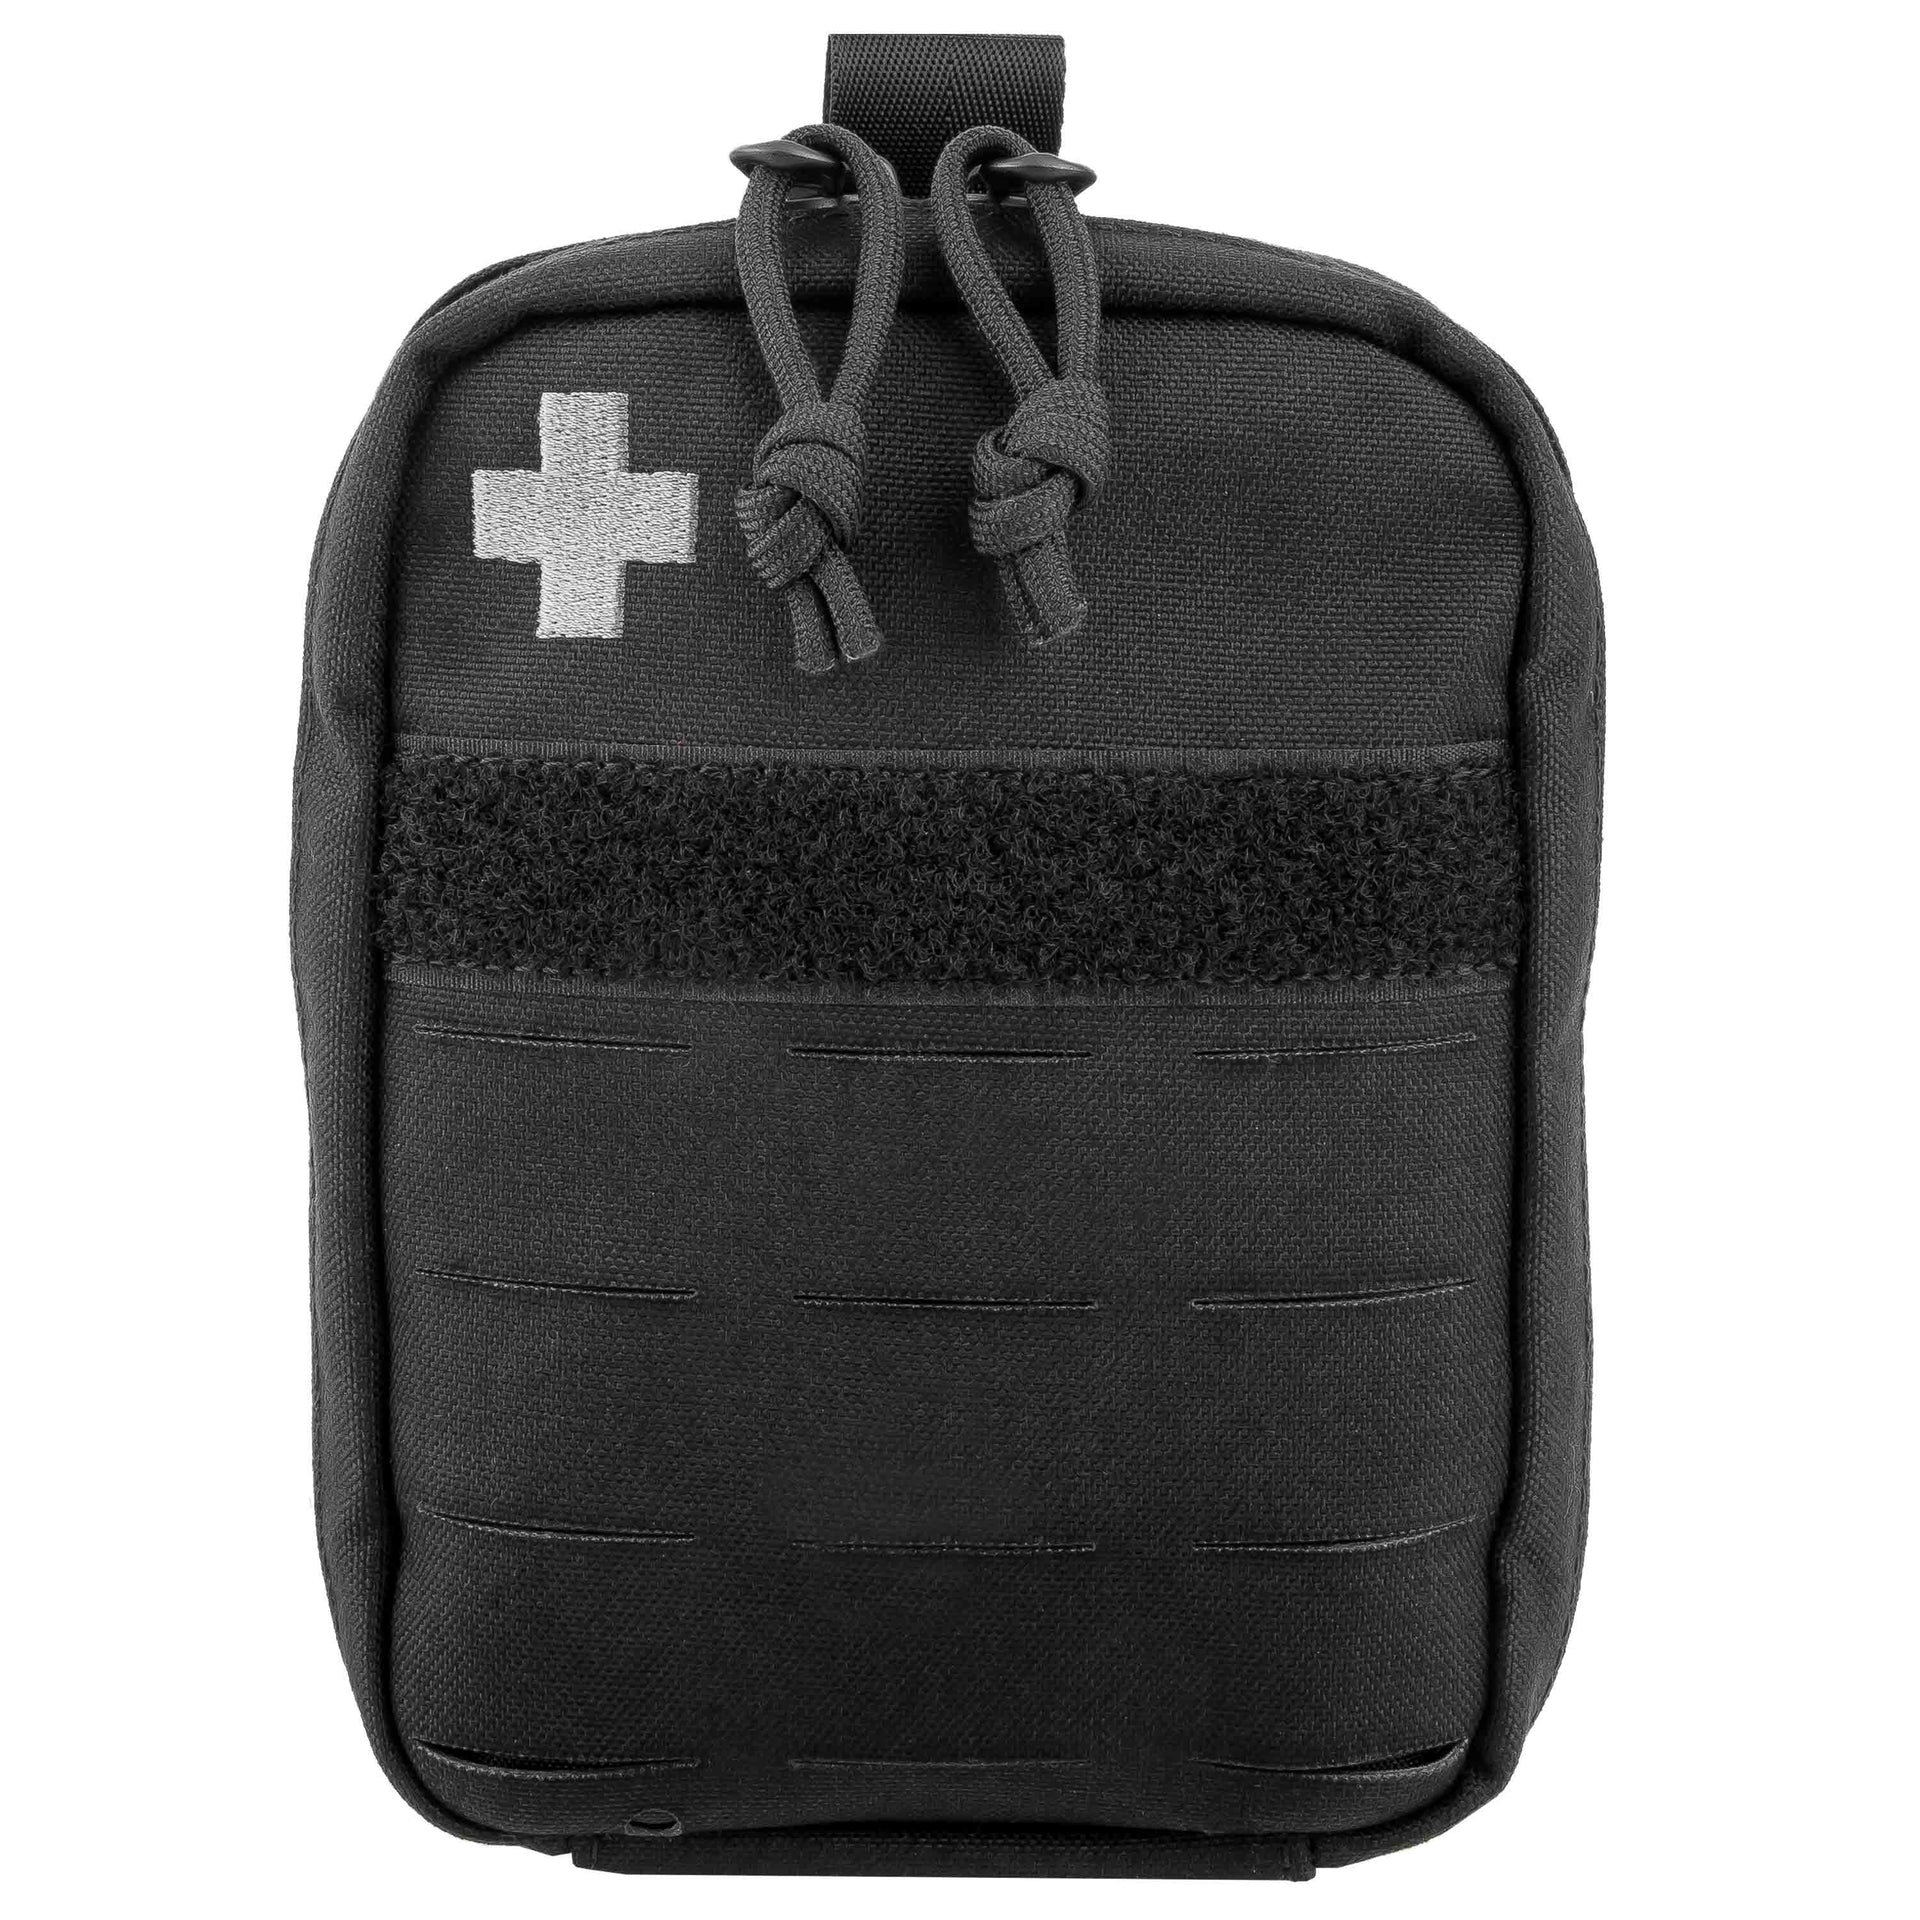 Tac Pouch Medic